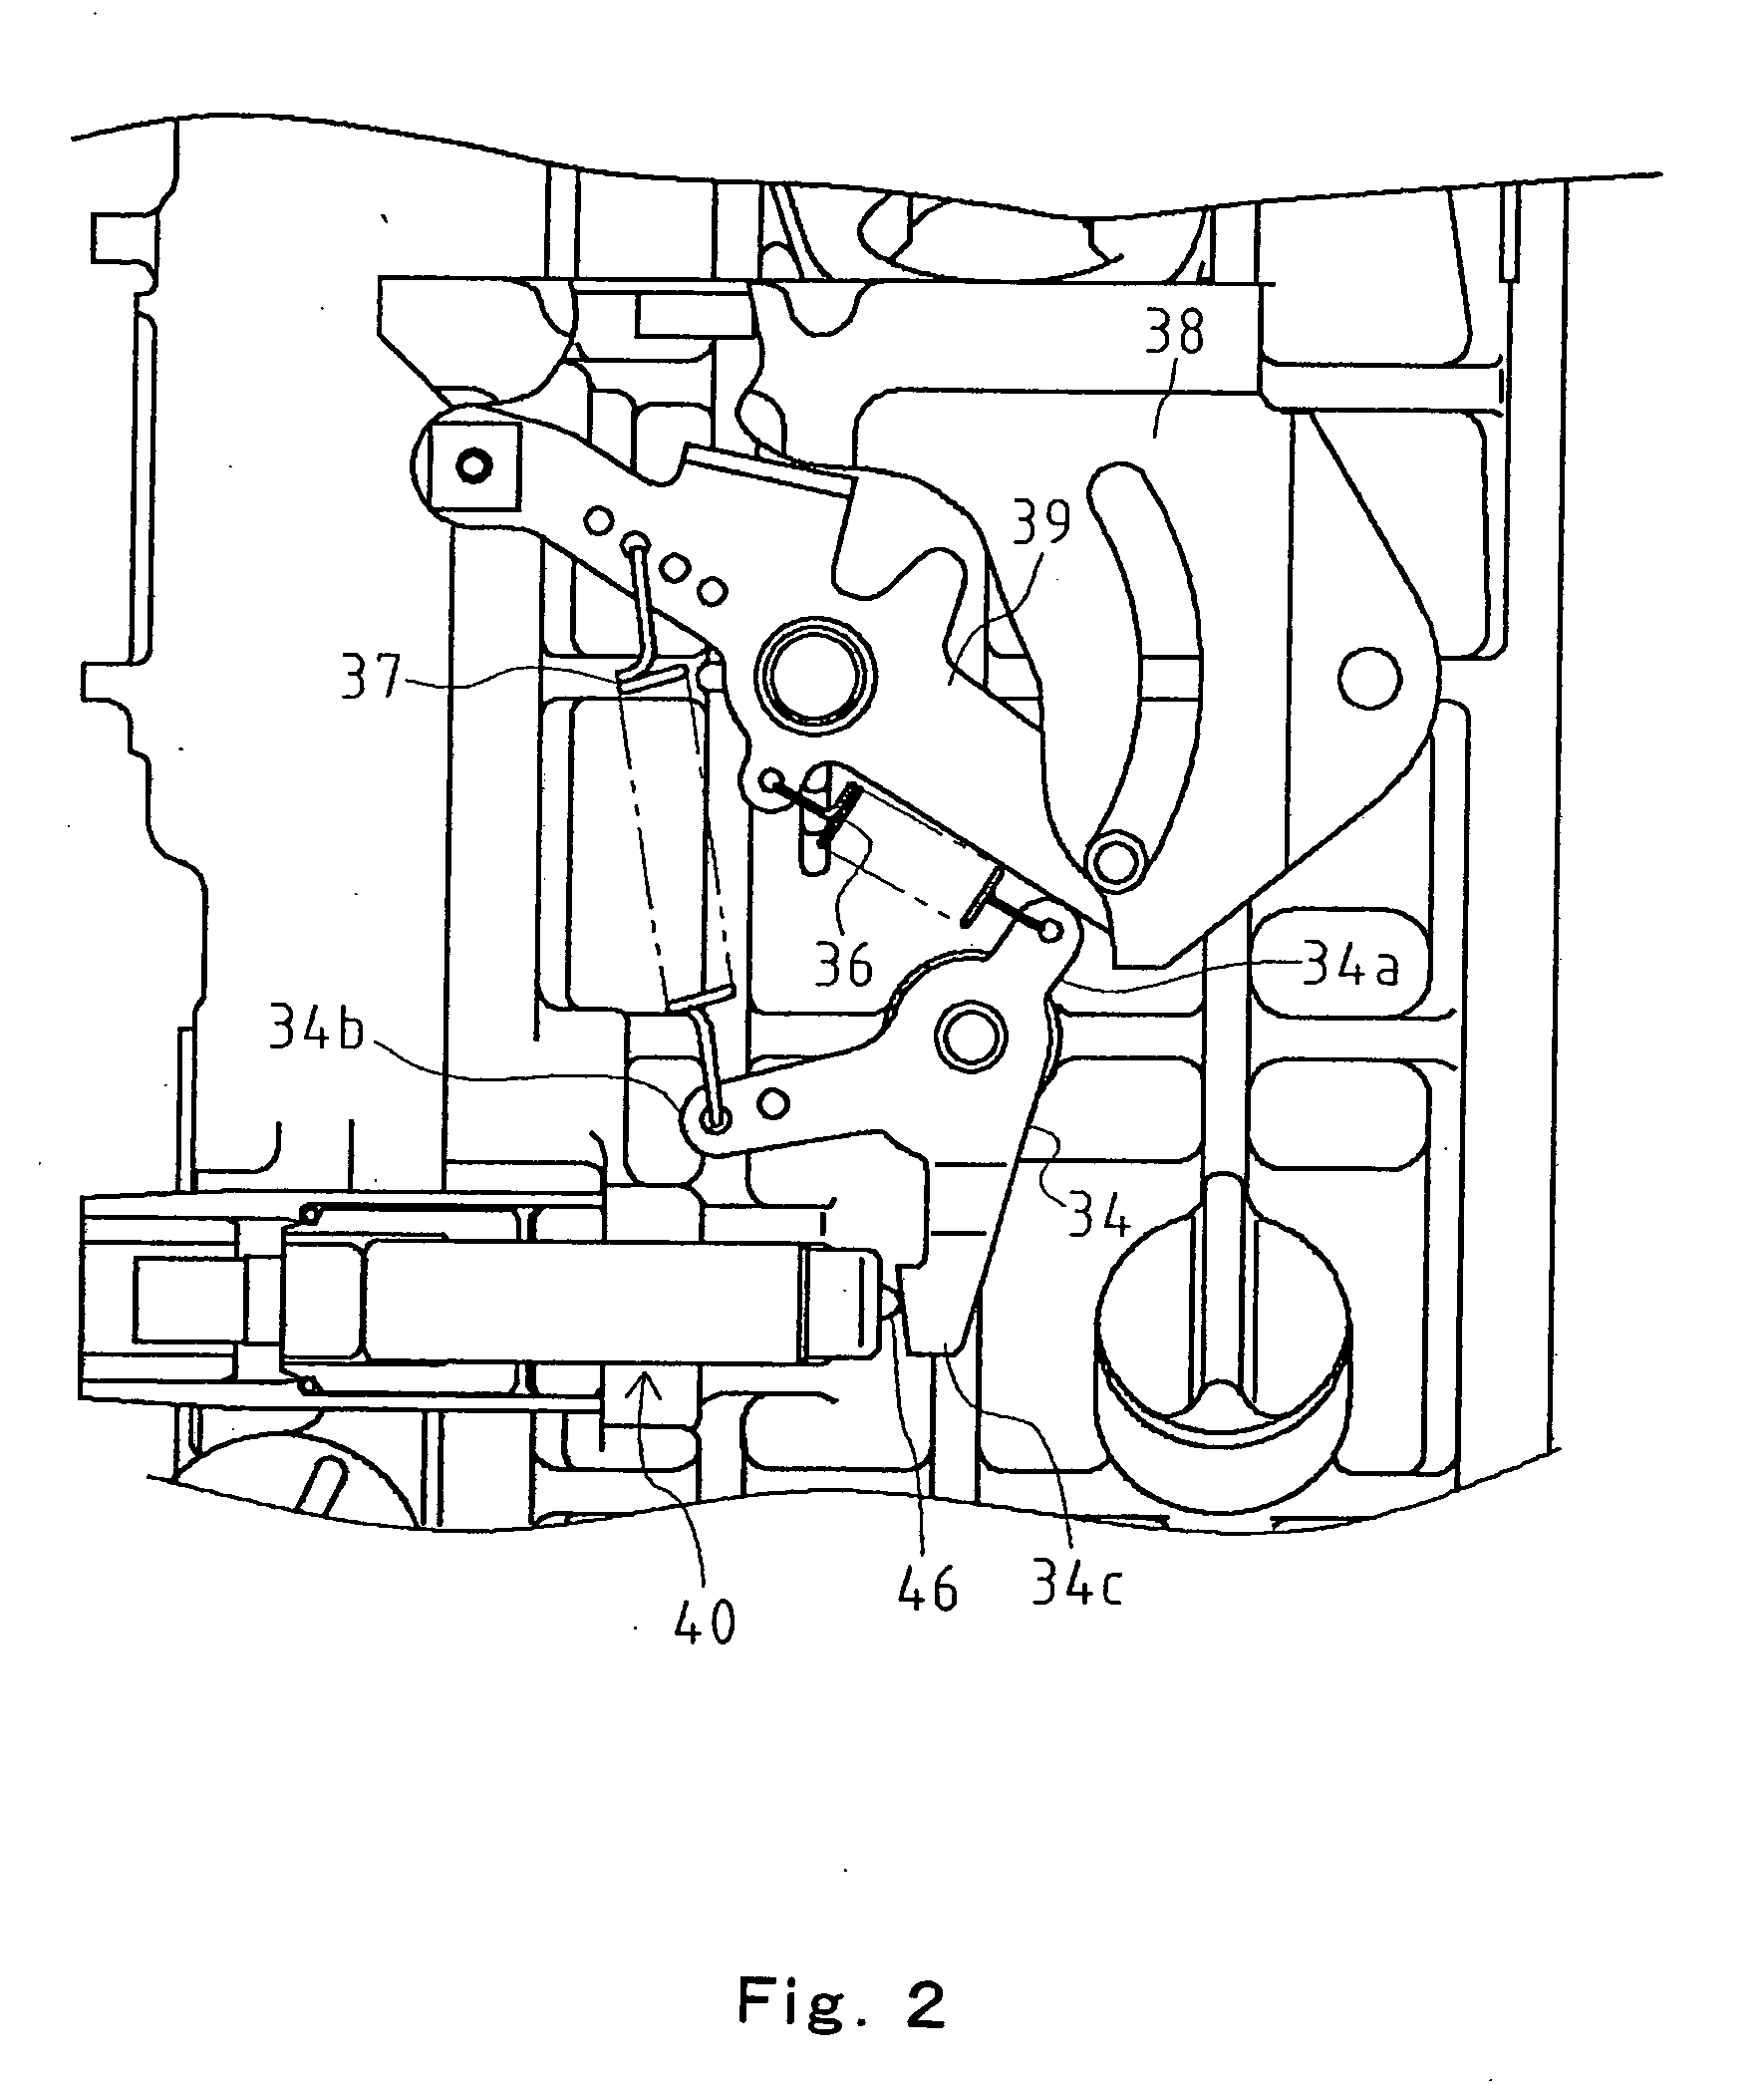 Exhaust gas recirculation device for engine